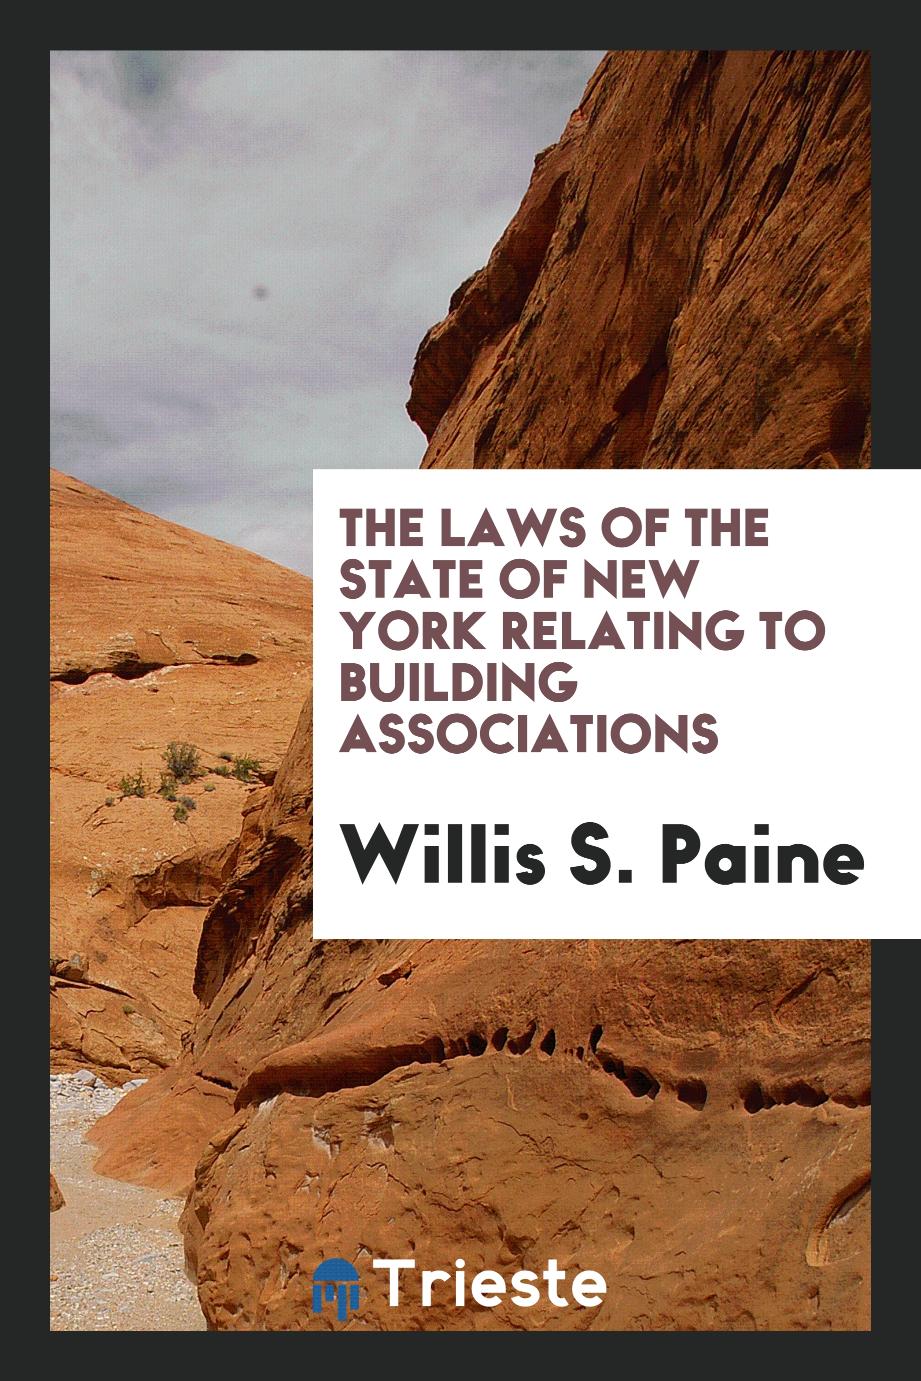 The Laws of the State of New York Relating to Building Associations